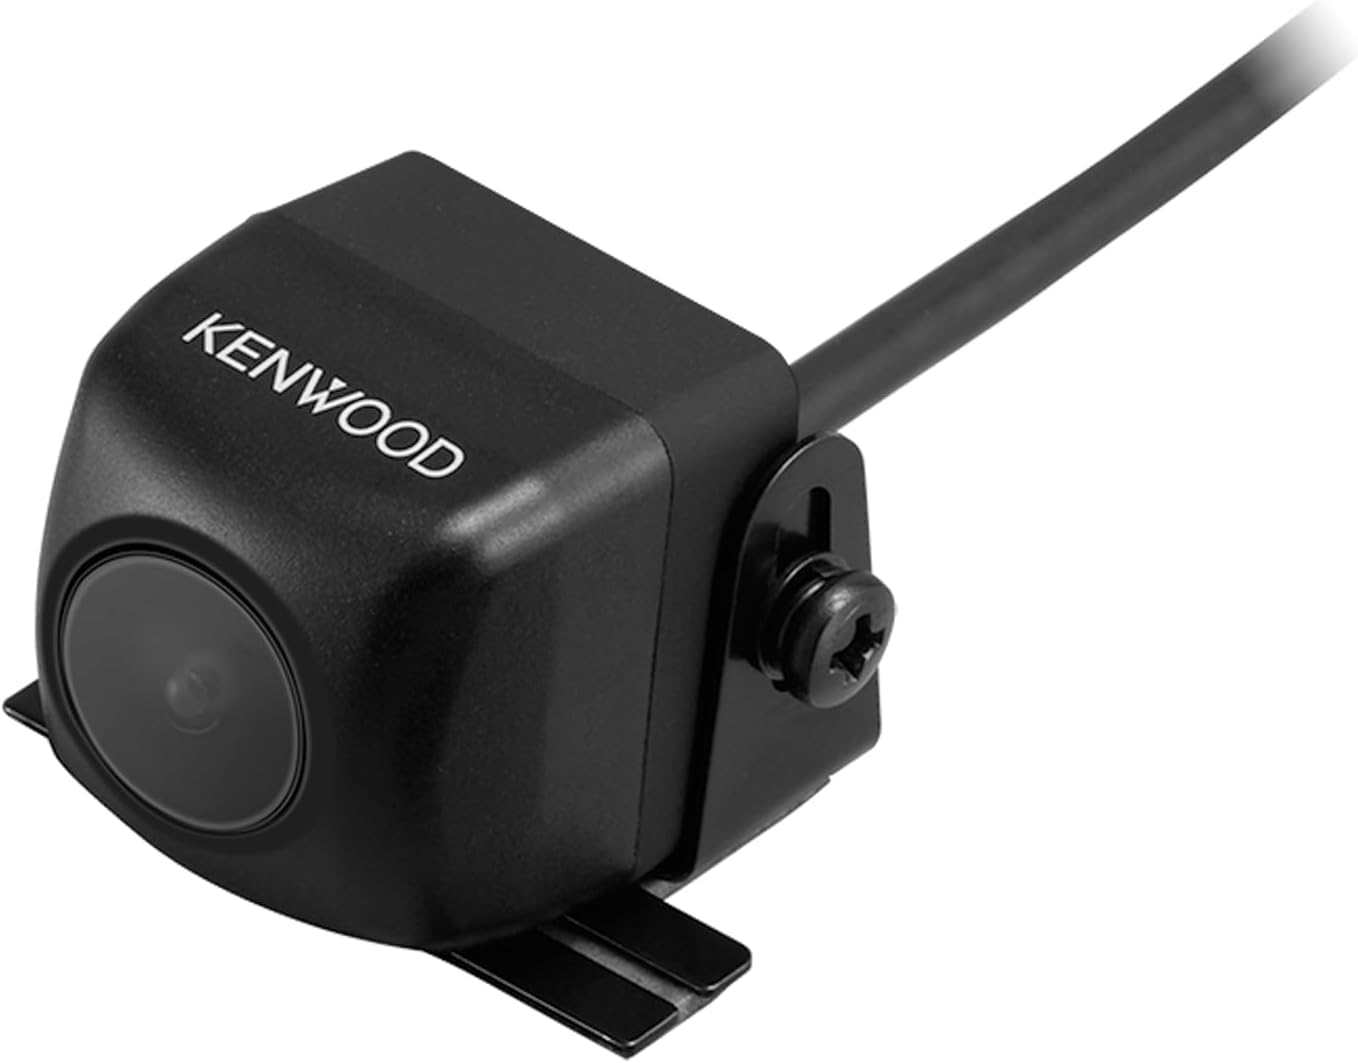 Kenwood DMX4707S Mechless 6.8" Car Stereo- Apple CarPlay, Android Auto + CMOS-230LP Backup Camera